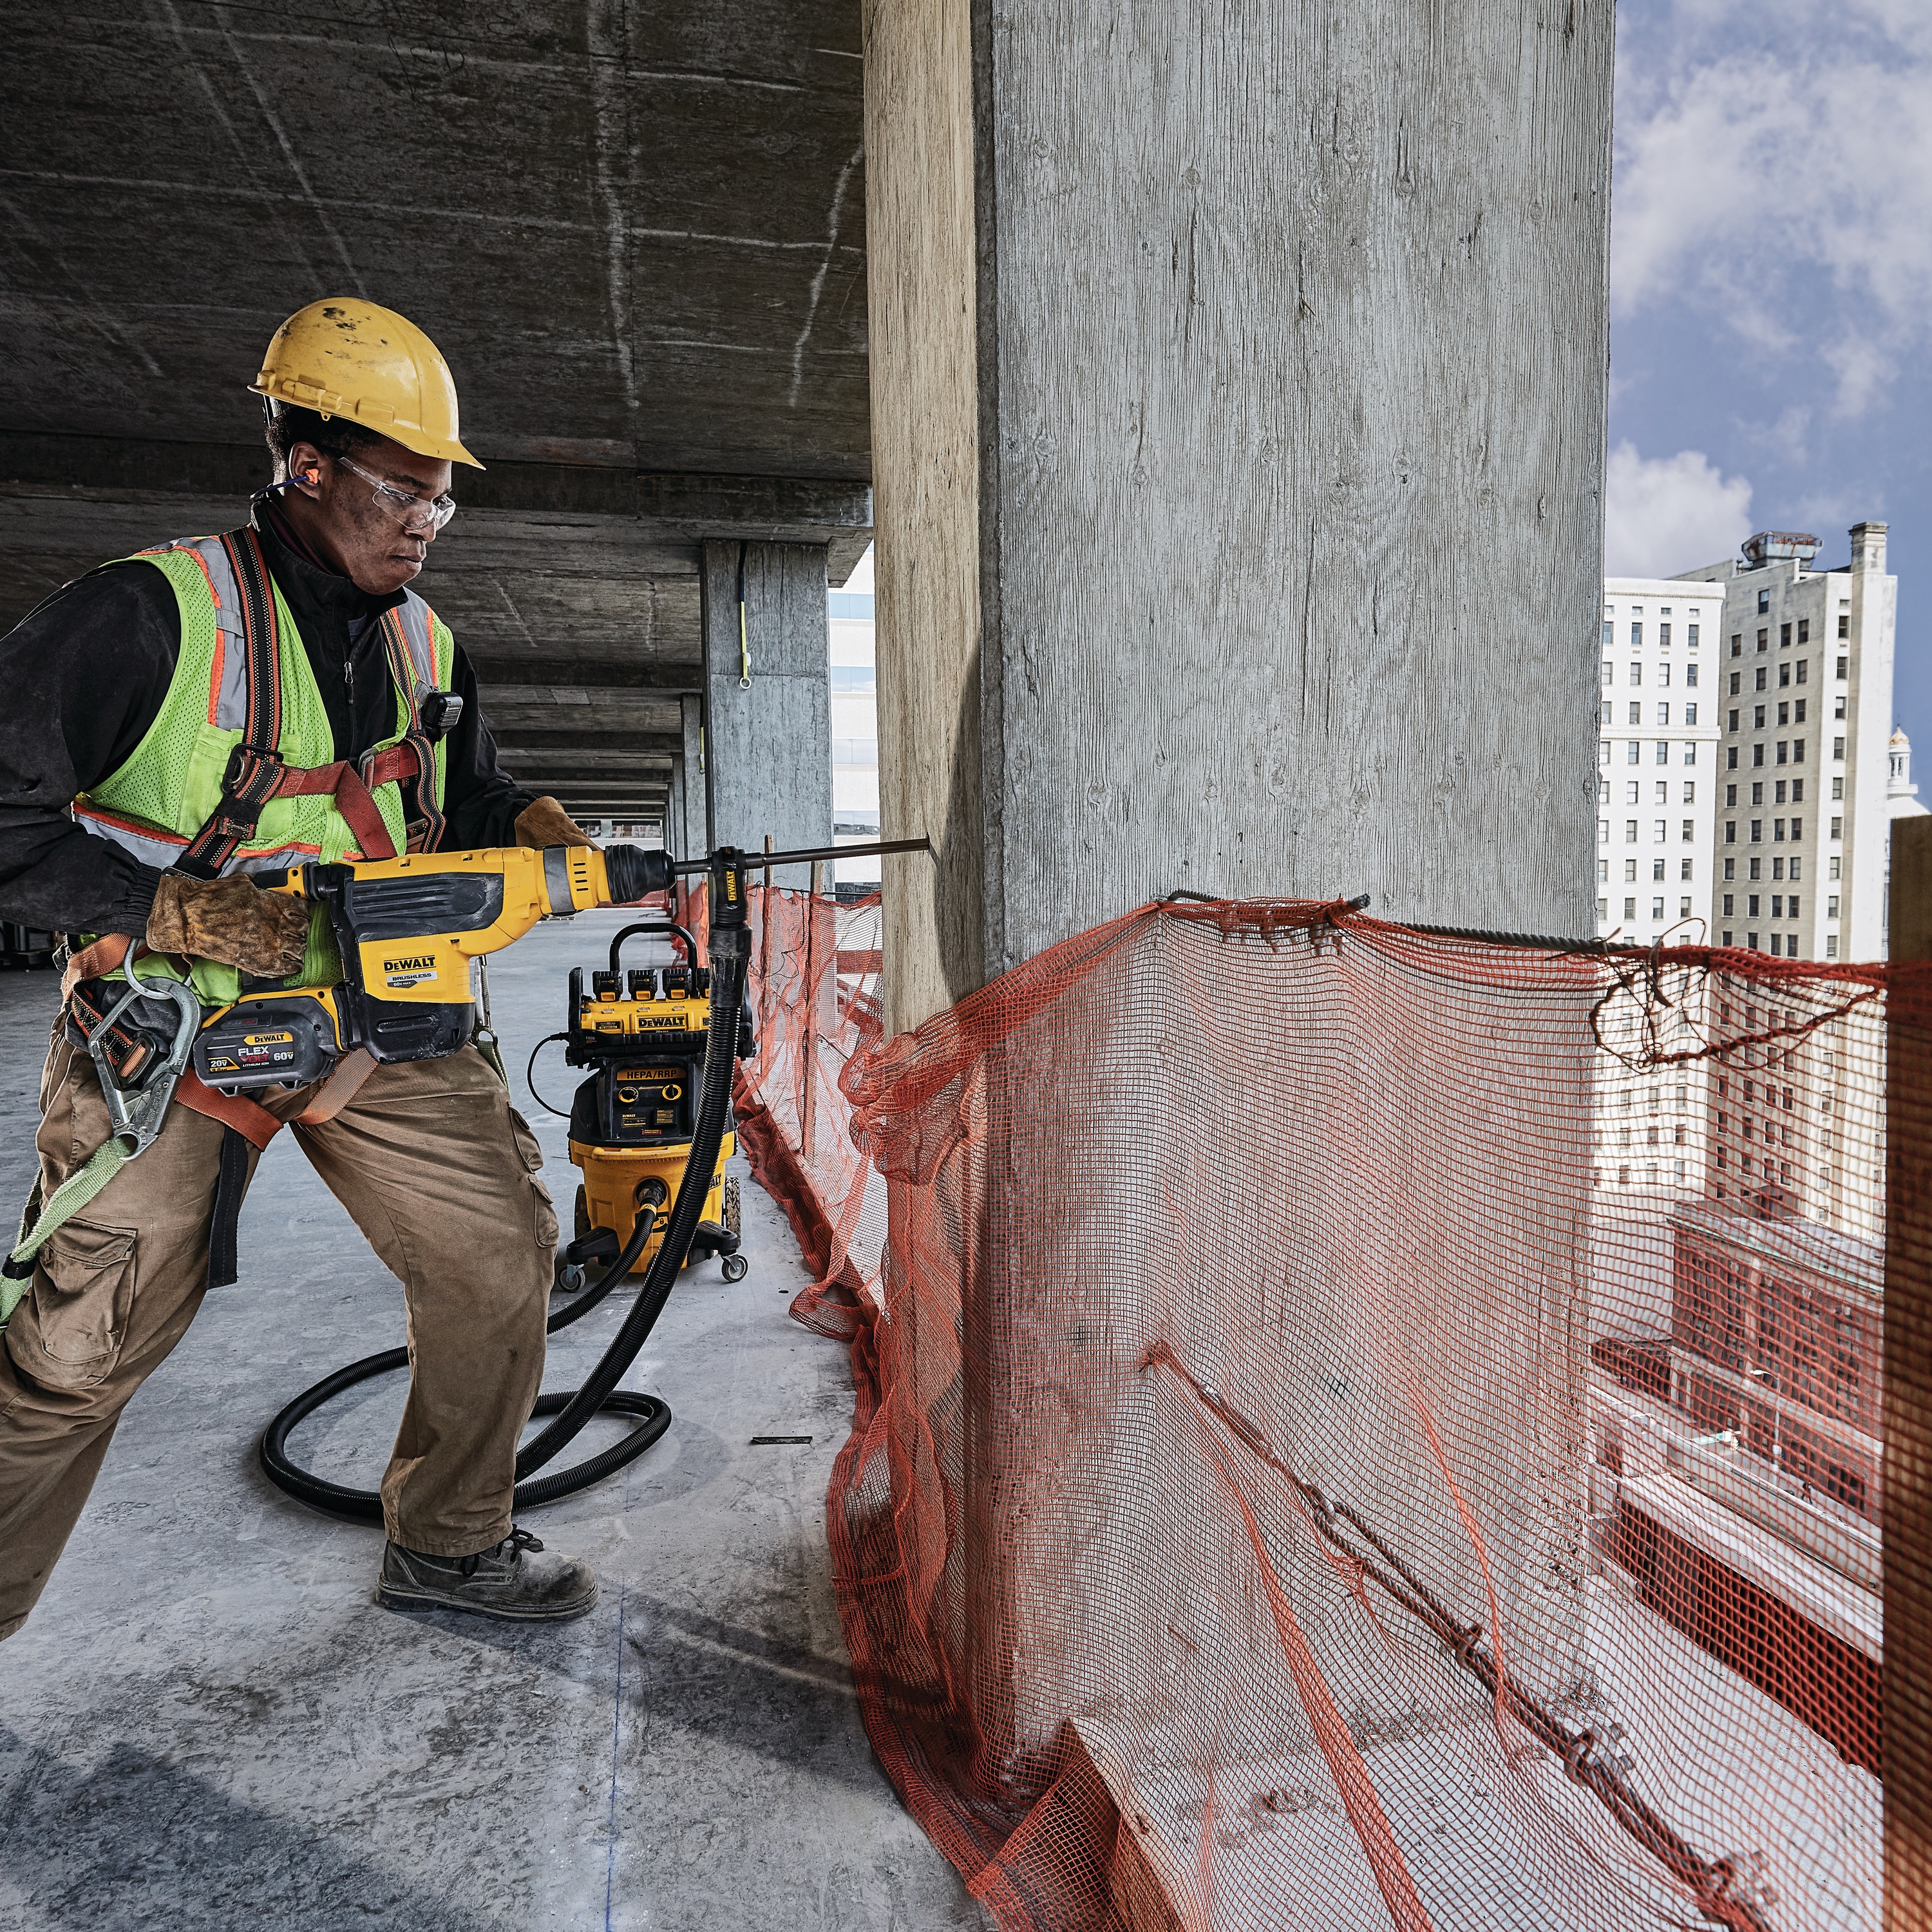 Brushless, cordless SDS MAX combination rotary hammer being used by a person